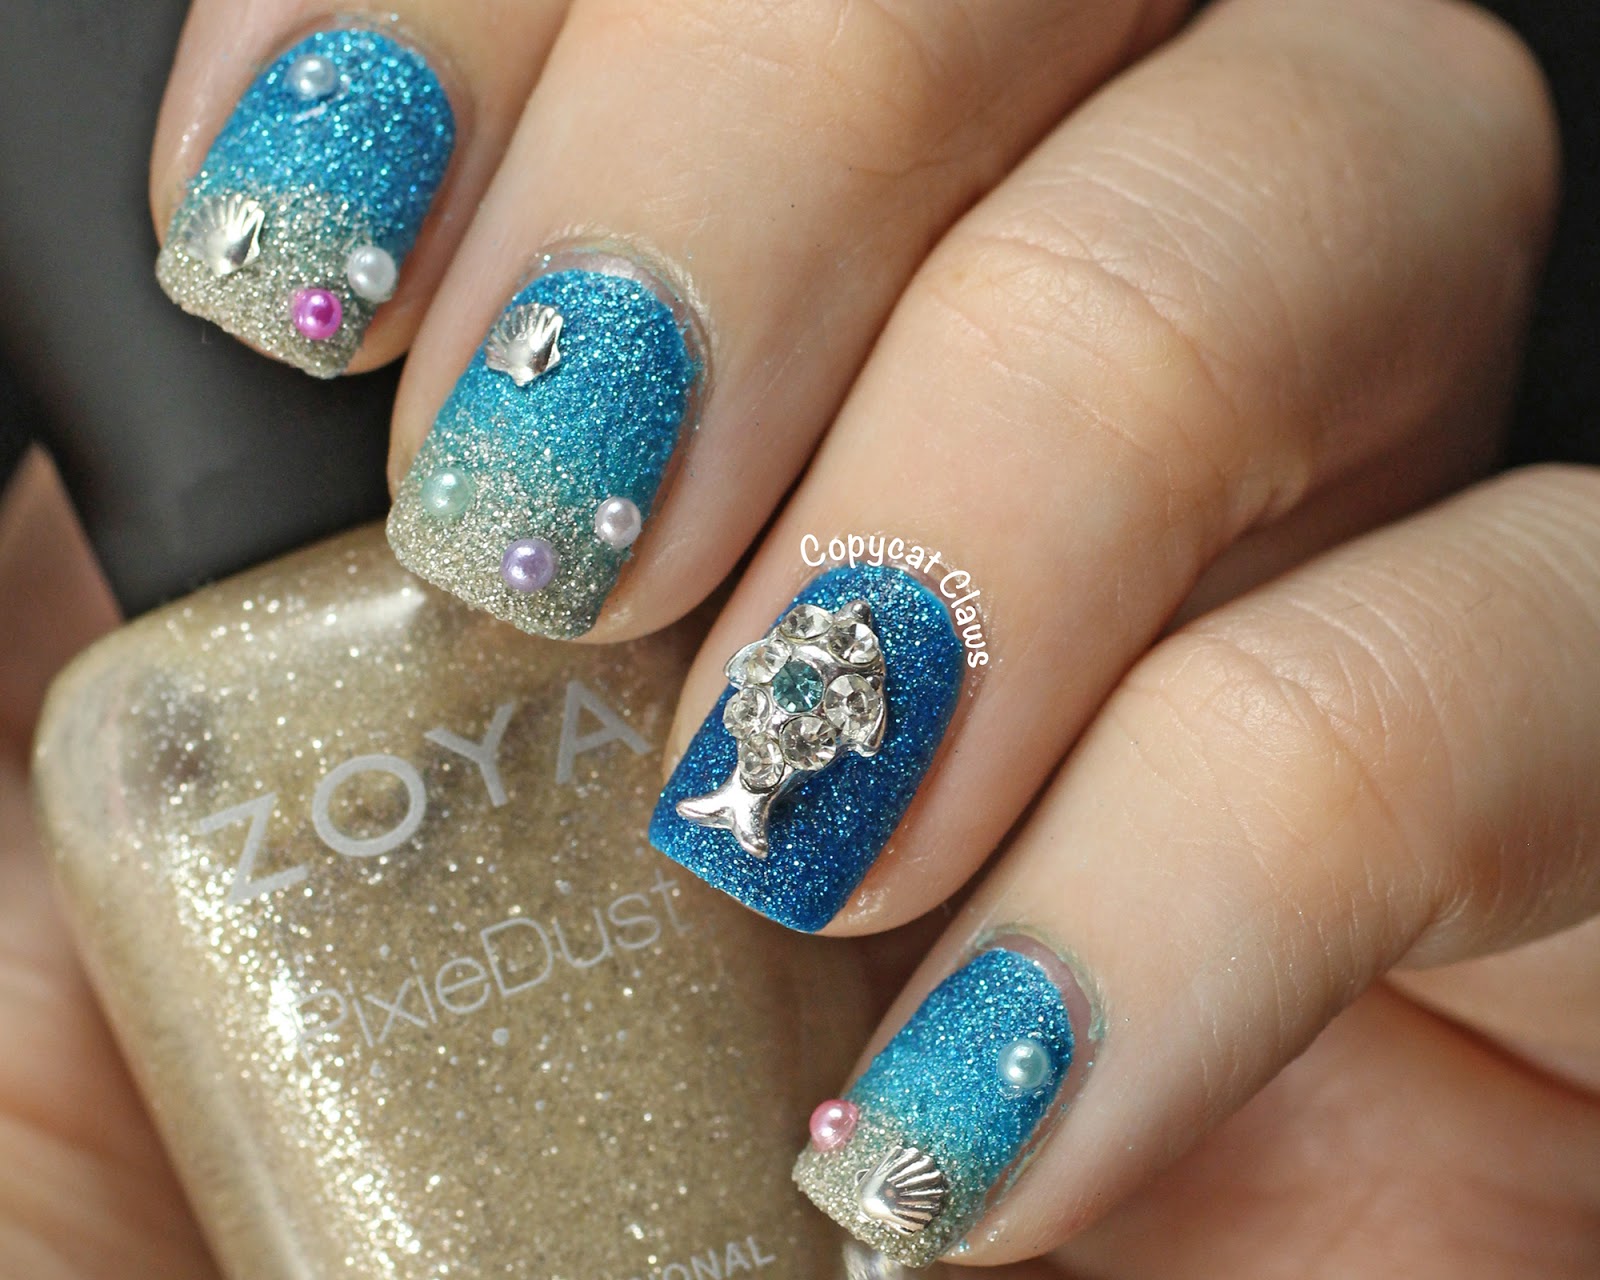 1. Beachy Ombre Nails - wide 2